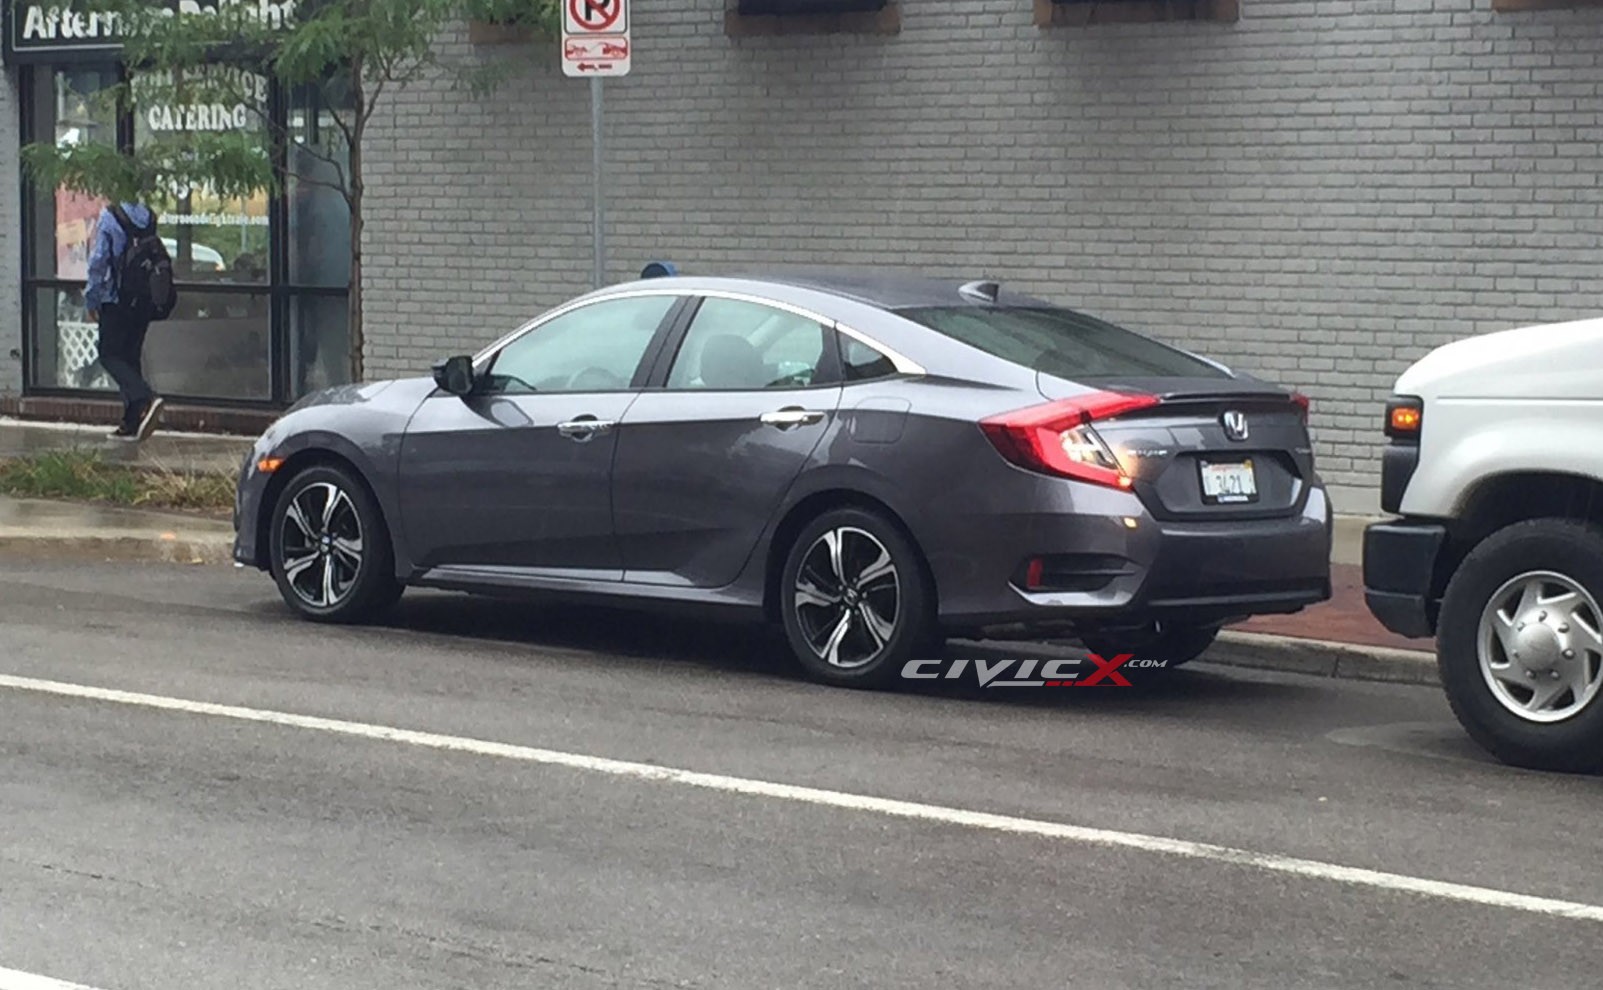 new-honda-civic-fully-revealed-ahead-of-official-debut-photo-gallery_1.jpg